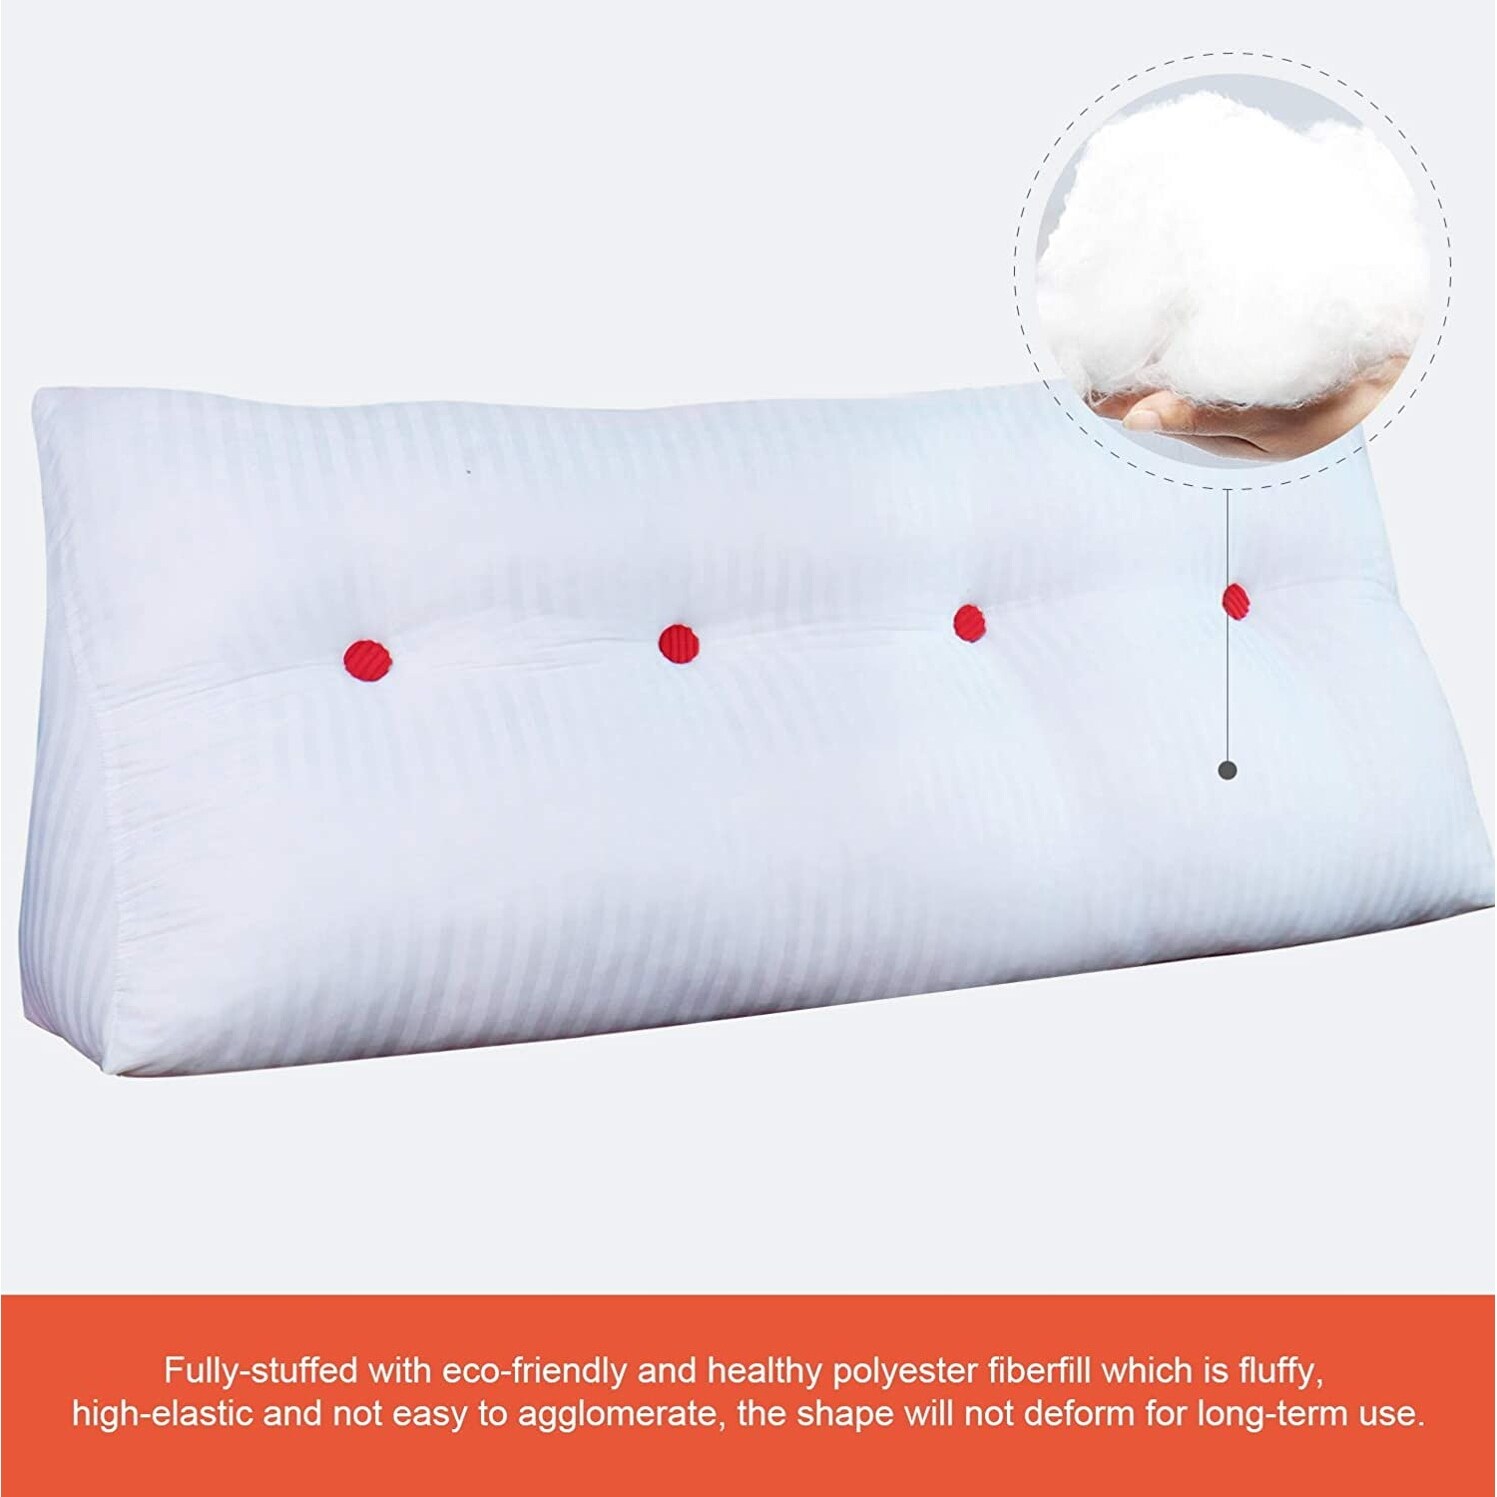 https://ak1.ostkcdn.com/images/products/is/images/direct/2a8ea65d9bfb335c847e96f24bd4165d20247e23/WOWMAX-Reading-Wedge-Pillow-Headboard-Cushion-for-Iron-or-Wood-Bed-Daybed-Back-Support.jpg